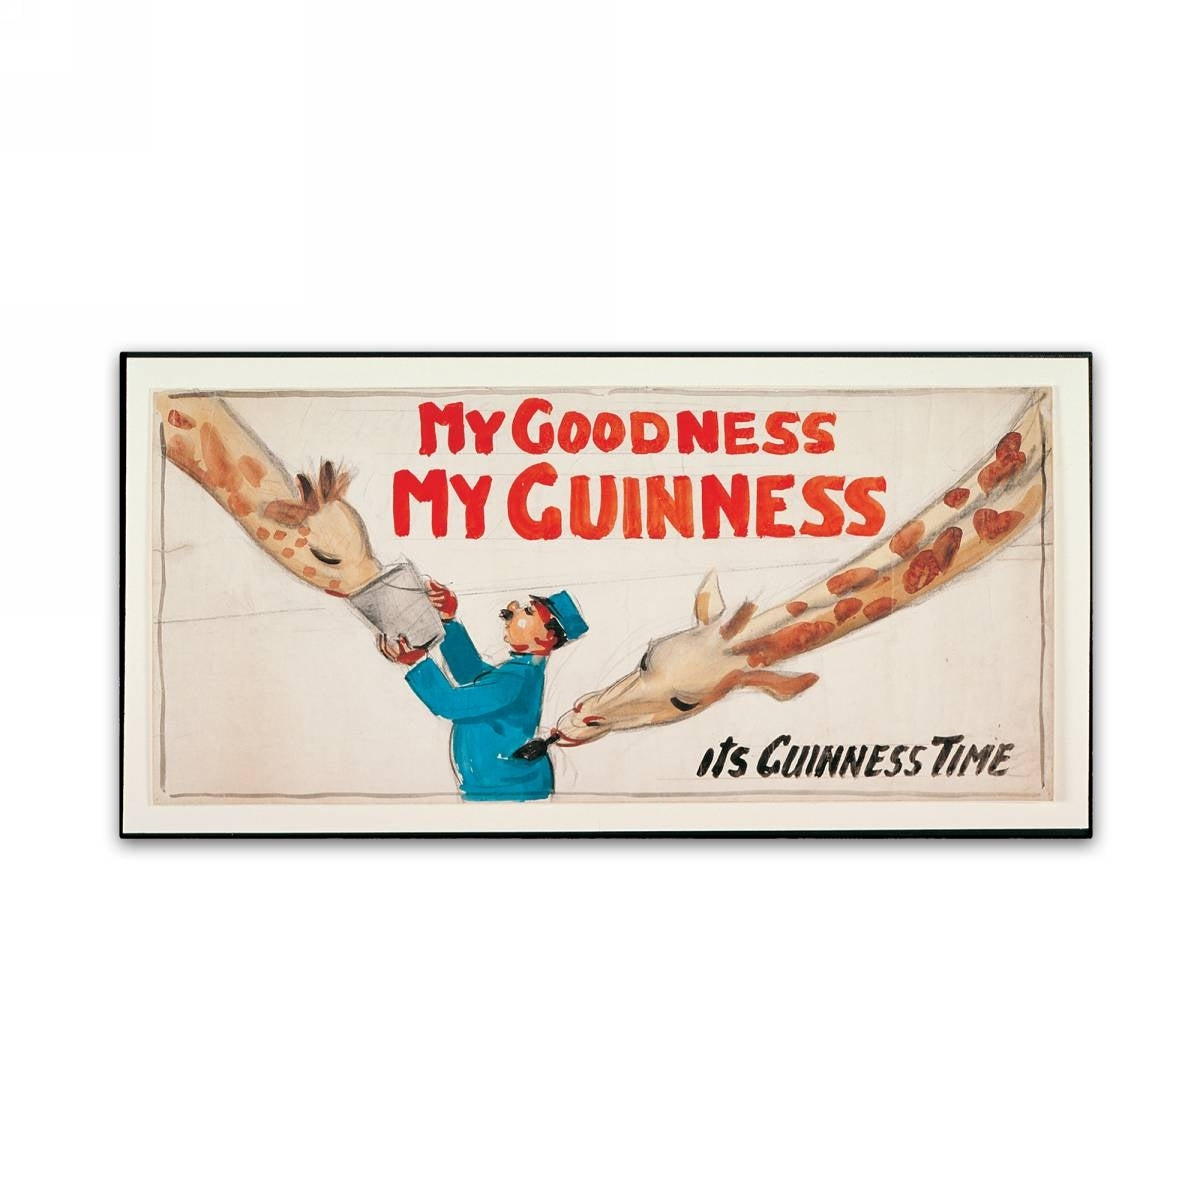 My goodness, my Guinness. This art piece showcases a captivating beer bottle of the Guinness Brewery 'My Goodness My Guinness III' Canvas Art.